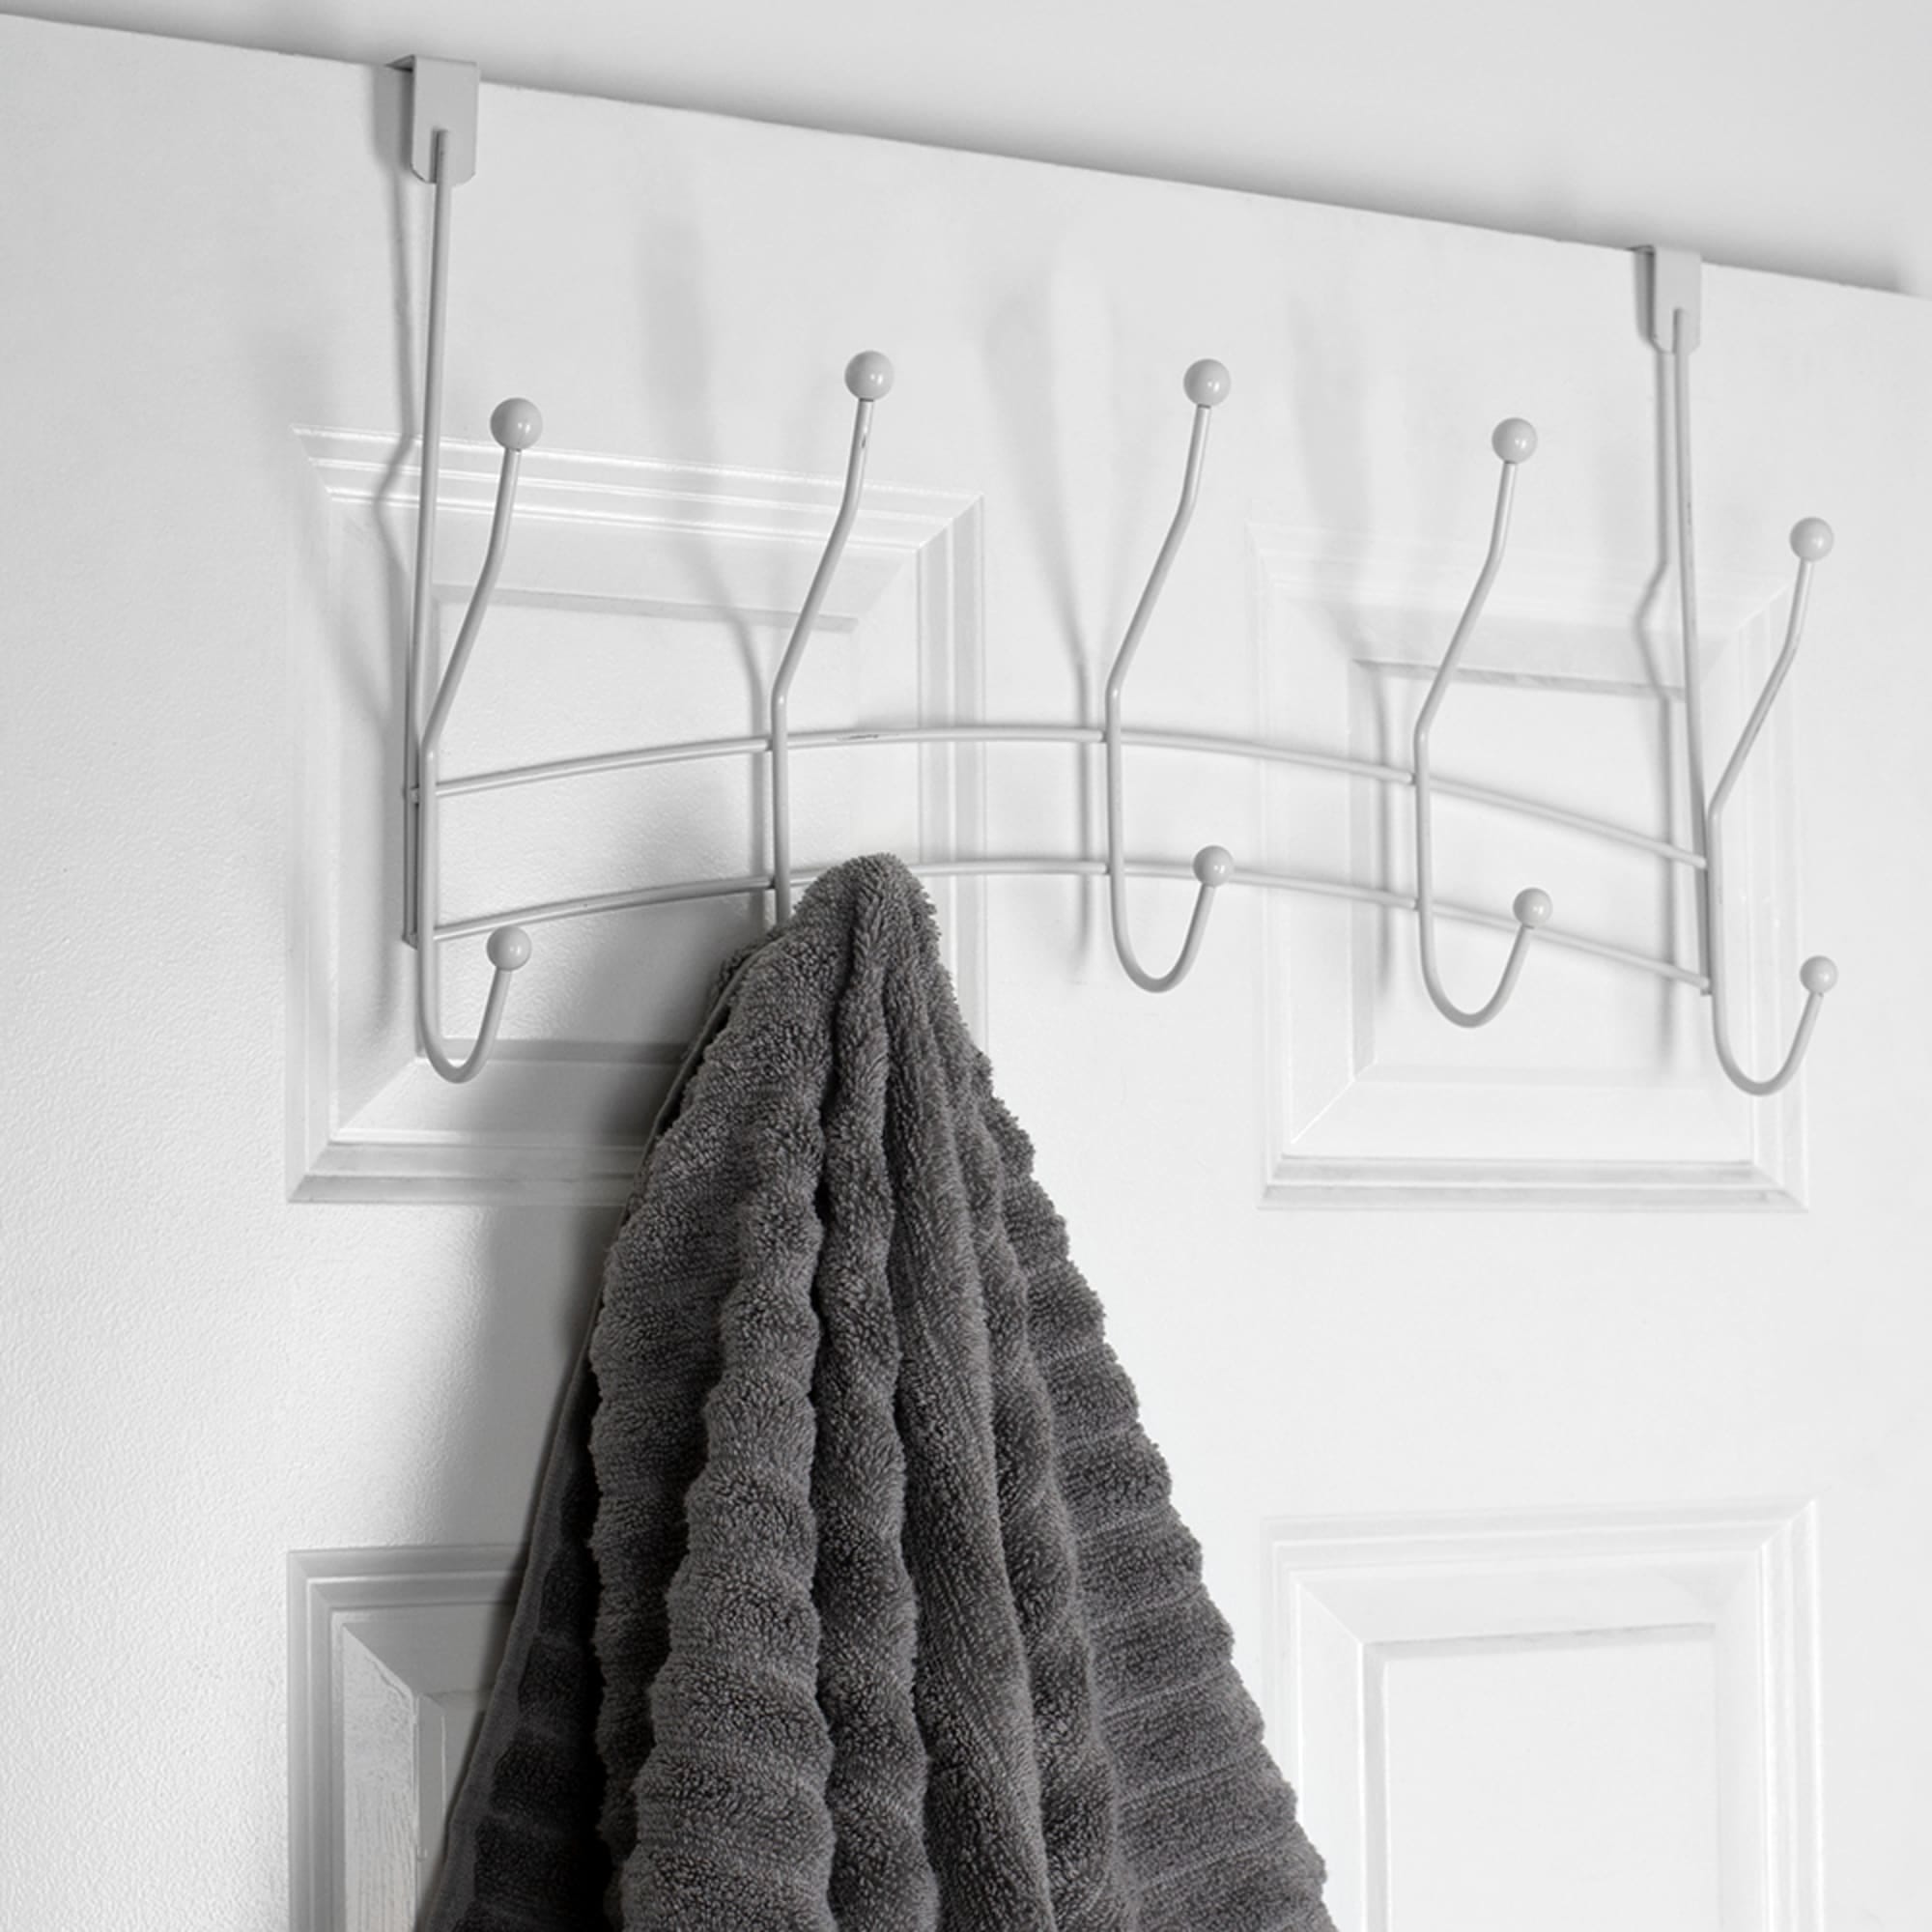 Home Basics Shelby 5 Hook Over the Door Hanging Rack, White $5.00 EACH, CASE PACK OF 12